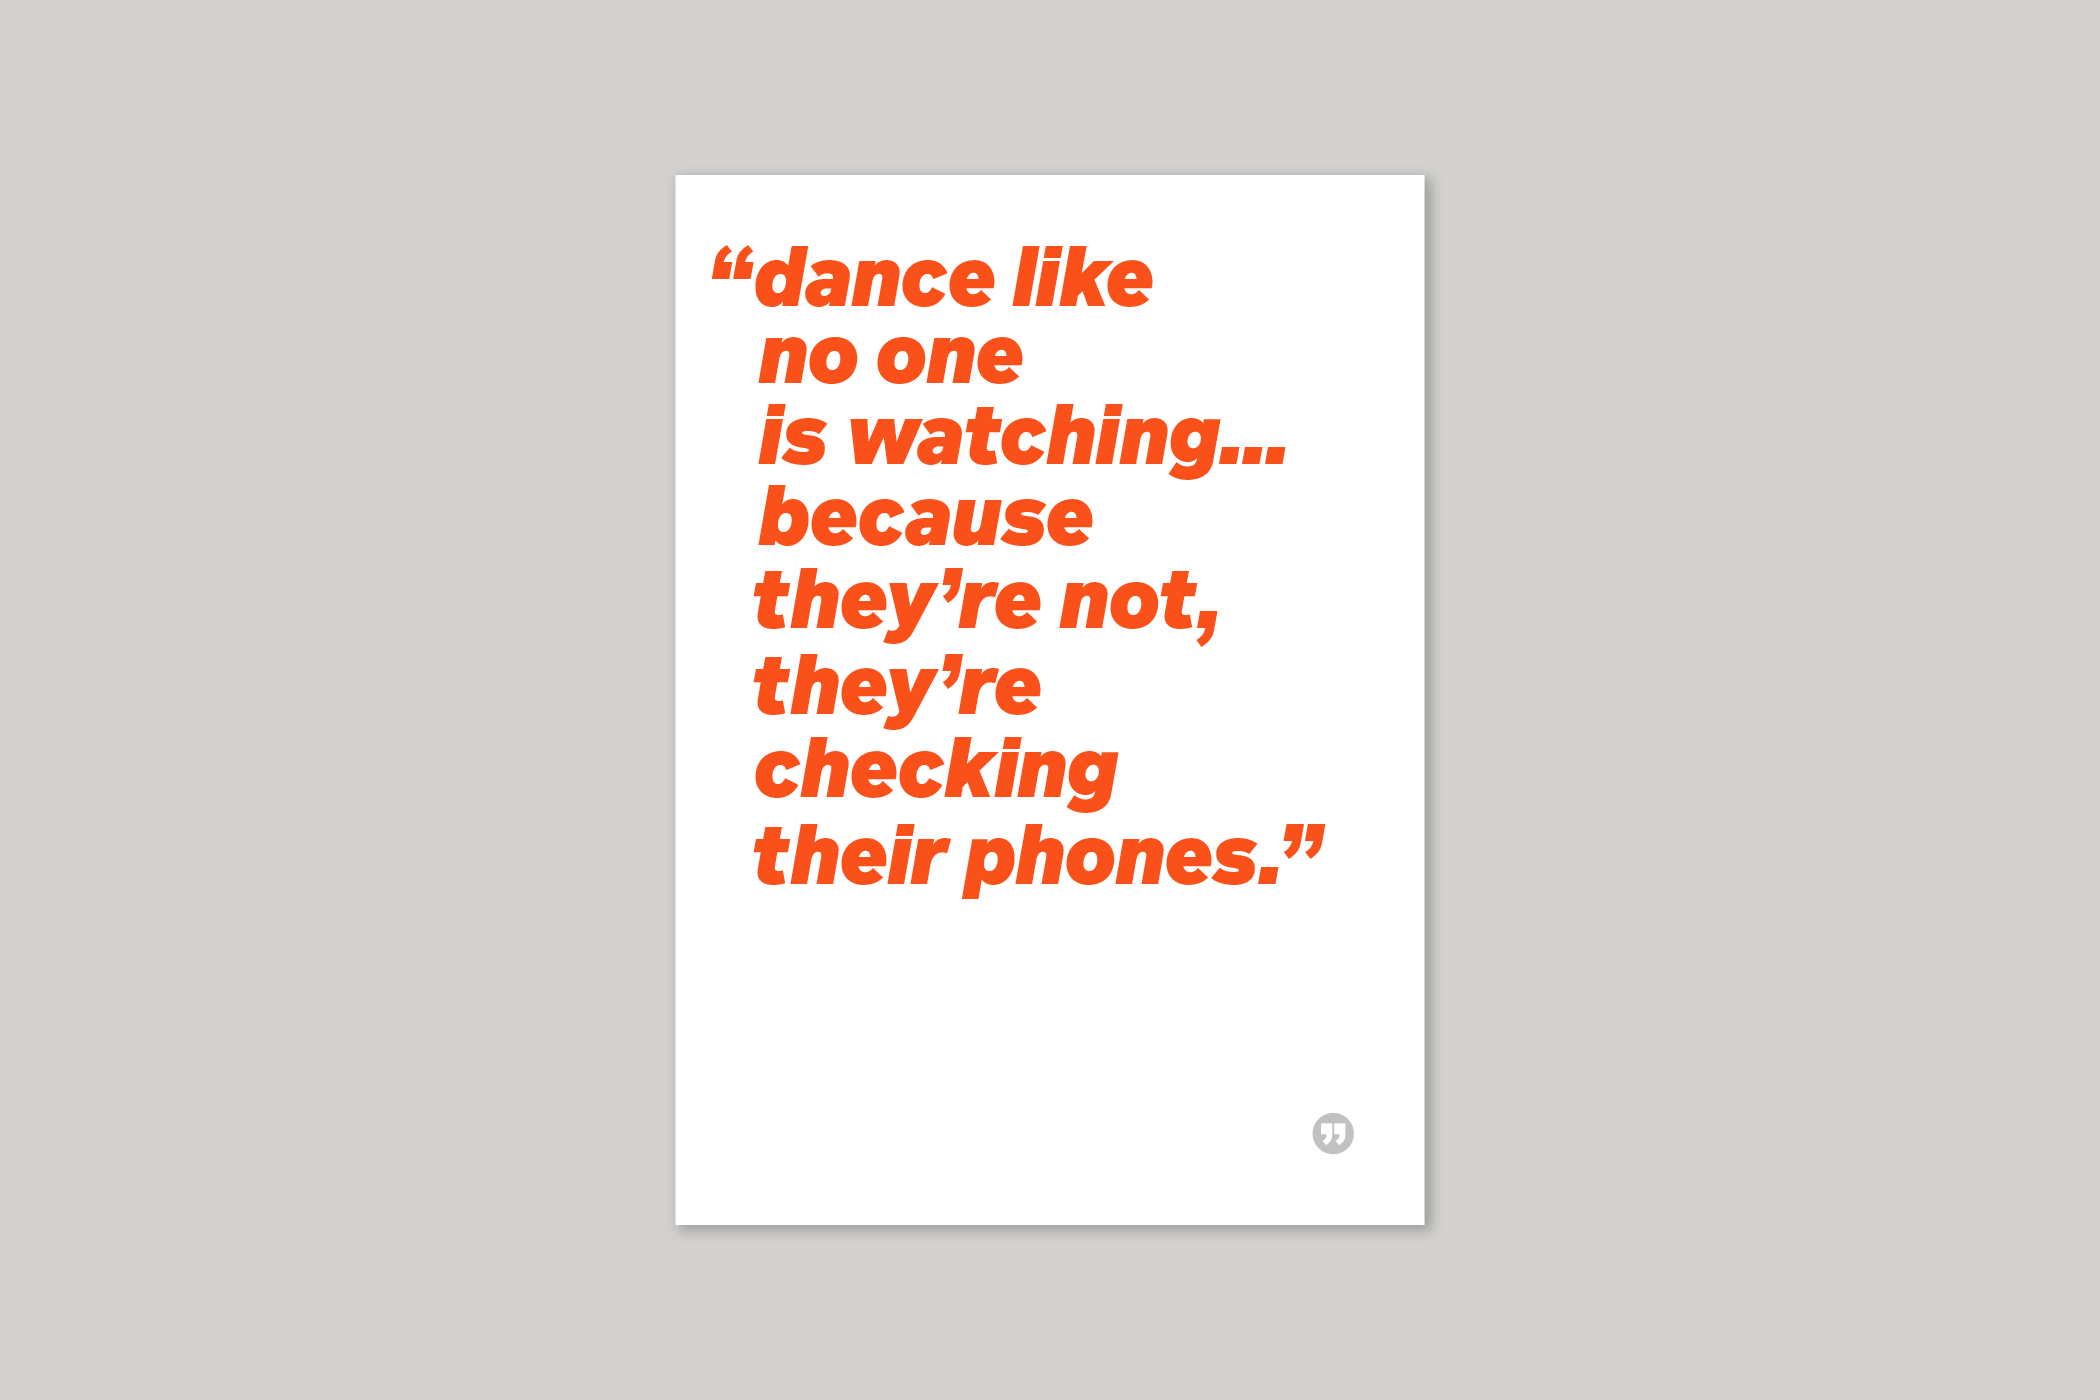 Dance funny quotation from Quotecards range of cards by Icon.